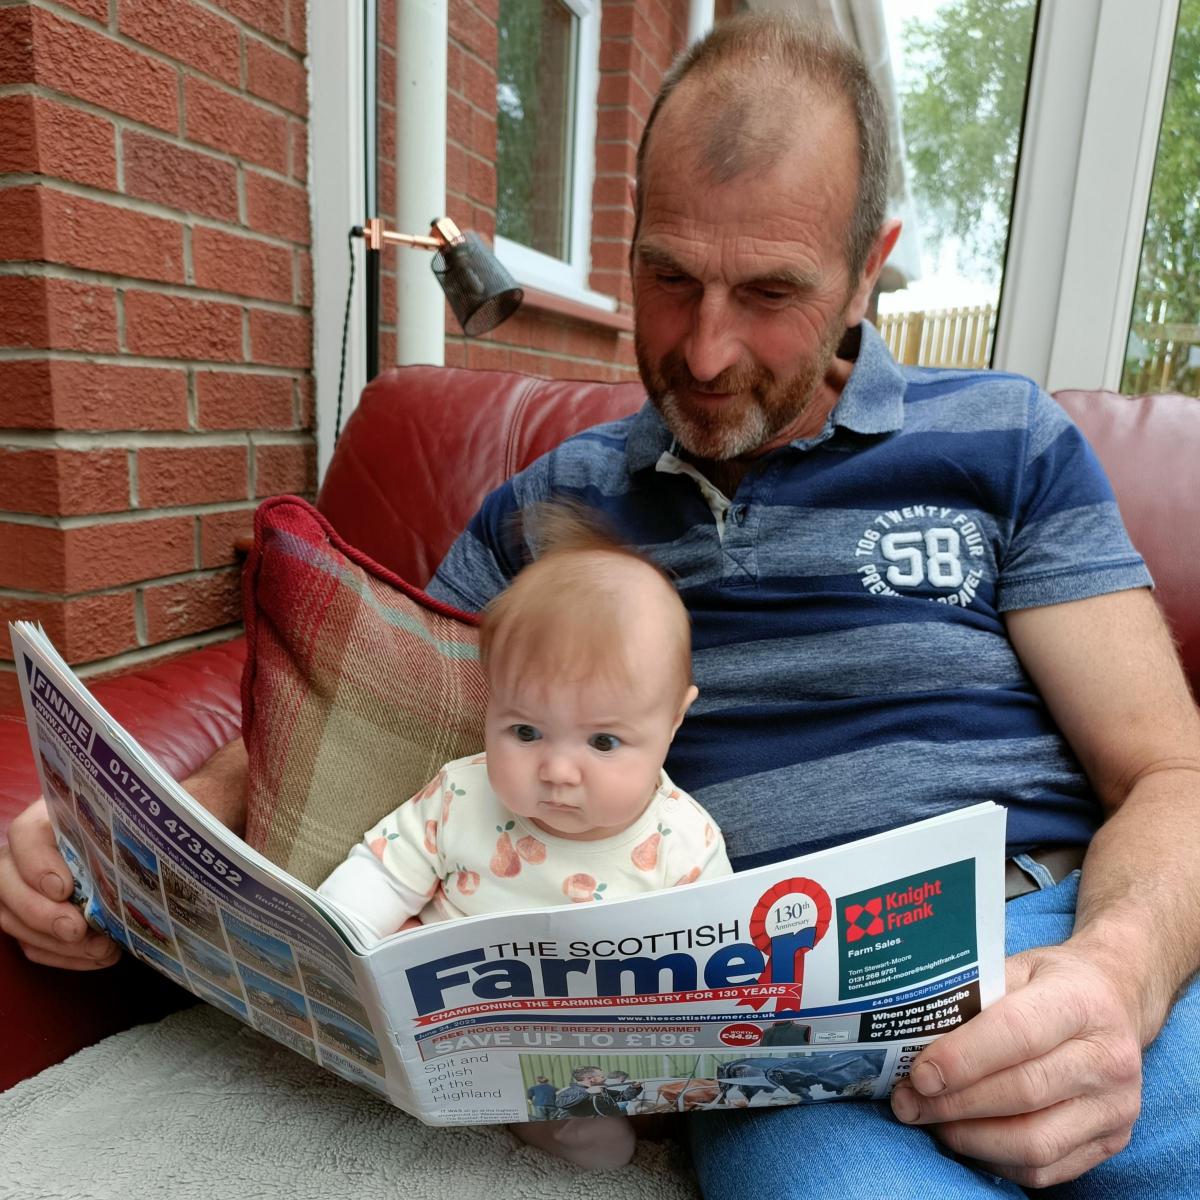 Jennifer King - My daughter Katie catching up of what's on at the Royal Highland in last week's farmer with her Papa.